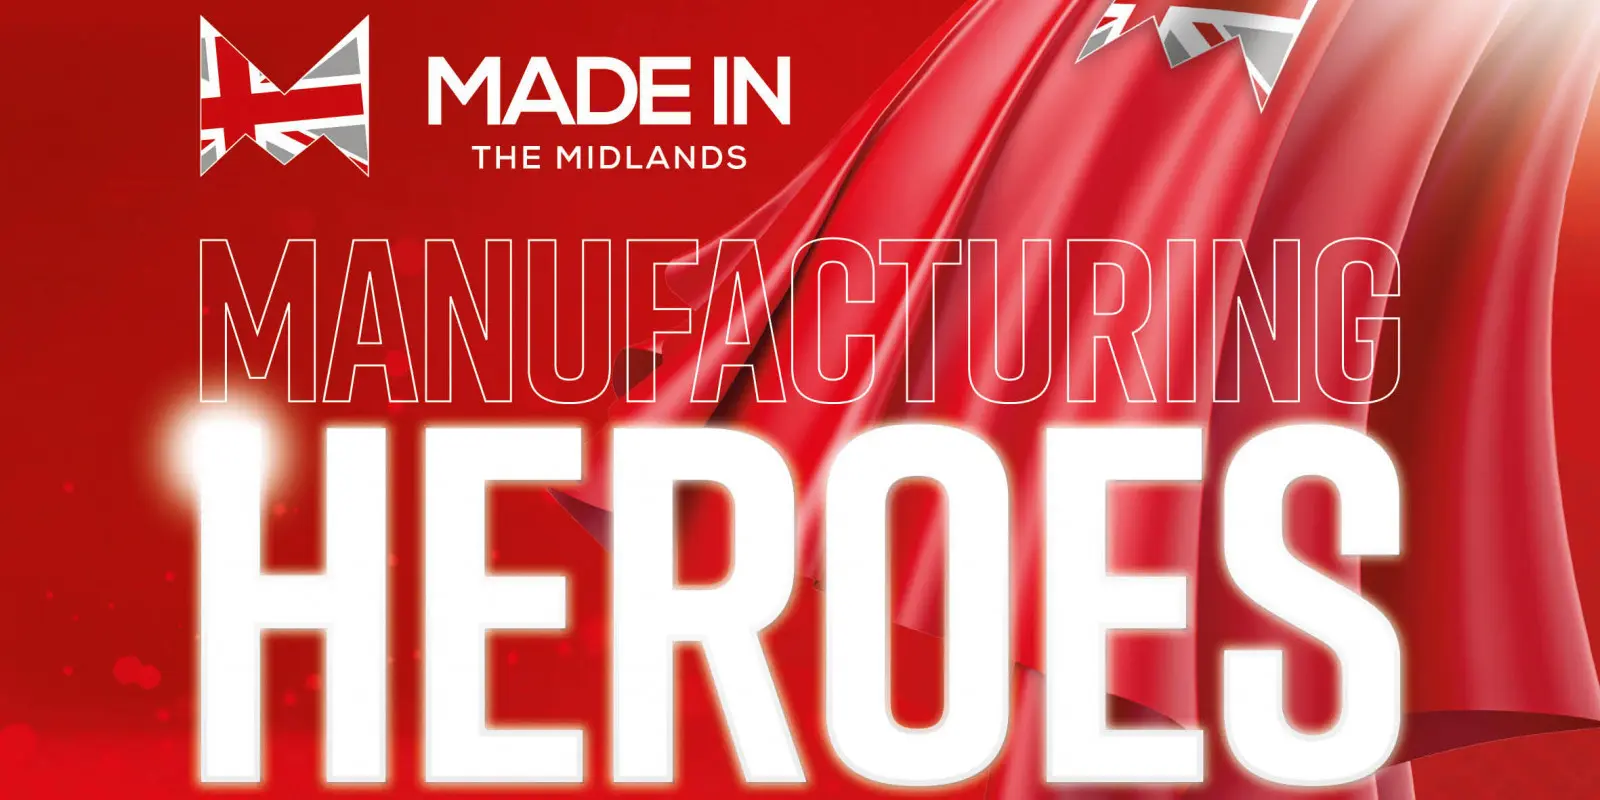 Made in Manufacturing Heroes